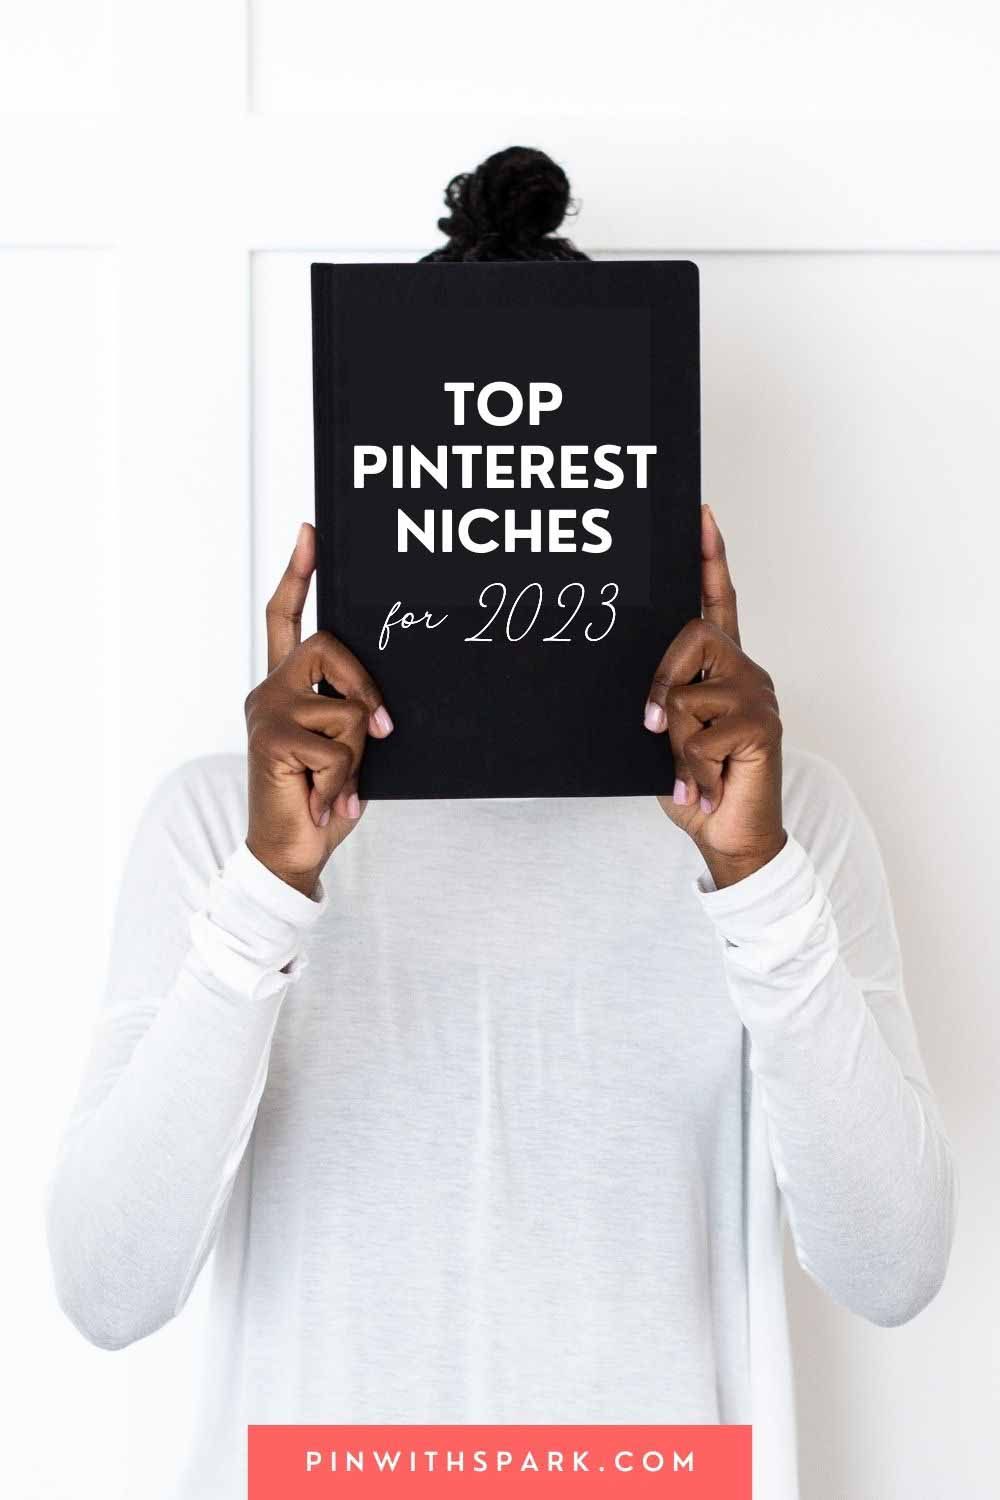 Top Pinterest niches in 2023text overlay pinwithspark.com